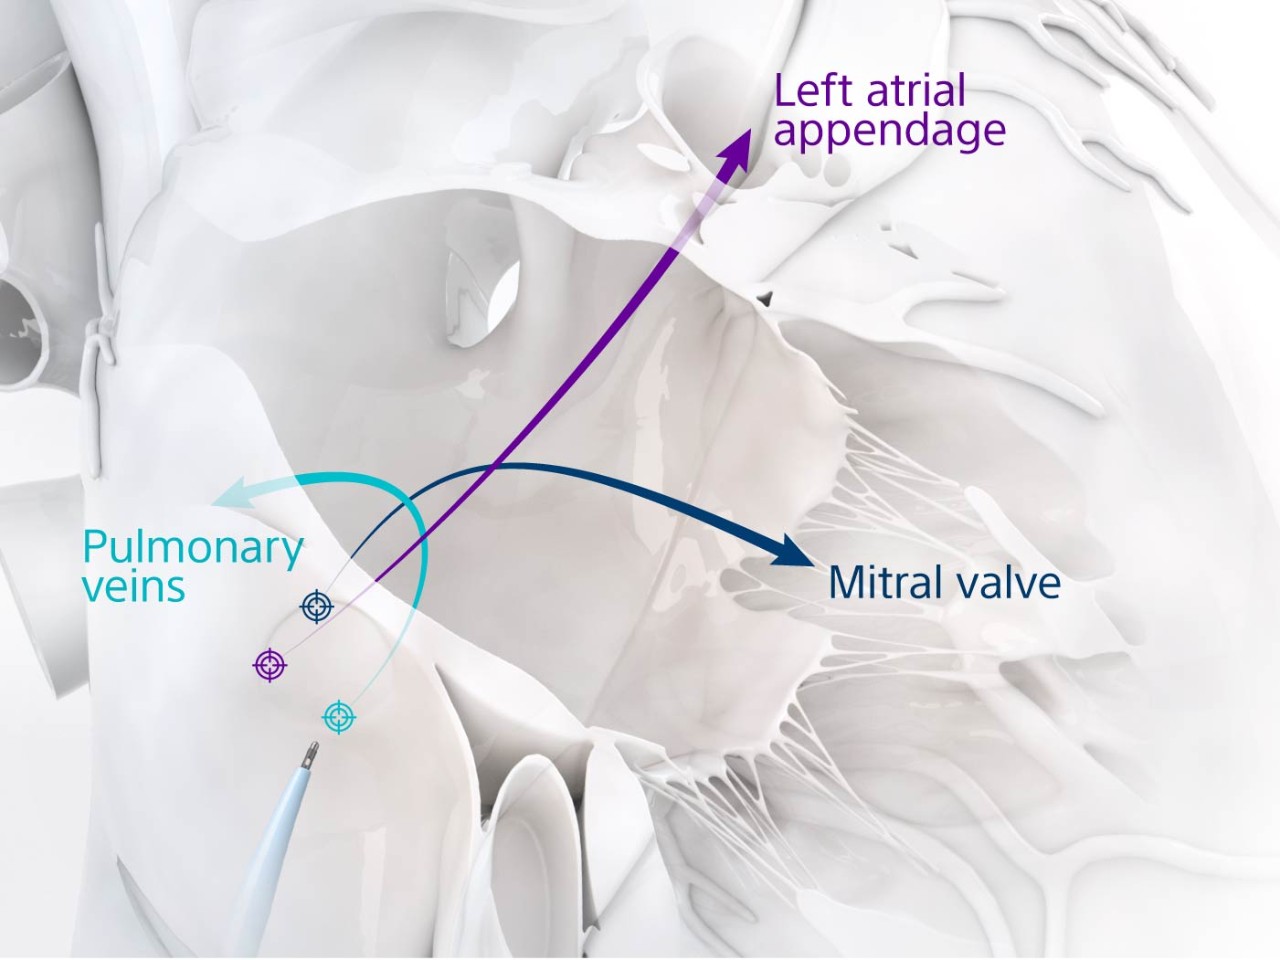 NRG Transseptal Needle with arrows to pulmonary veins, left atrial appendage, and mitral valve.